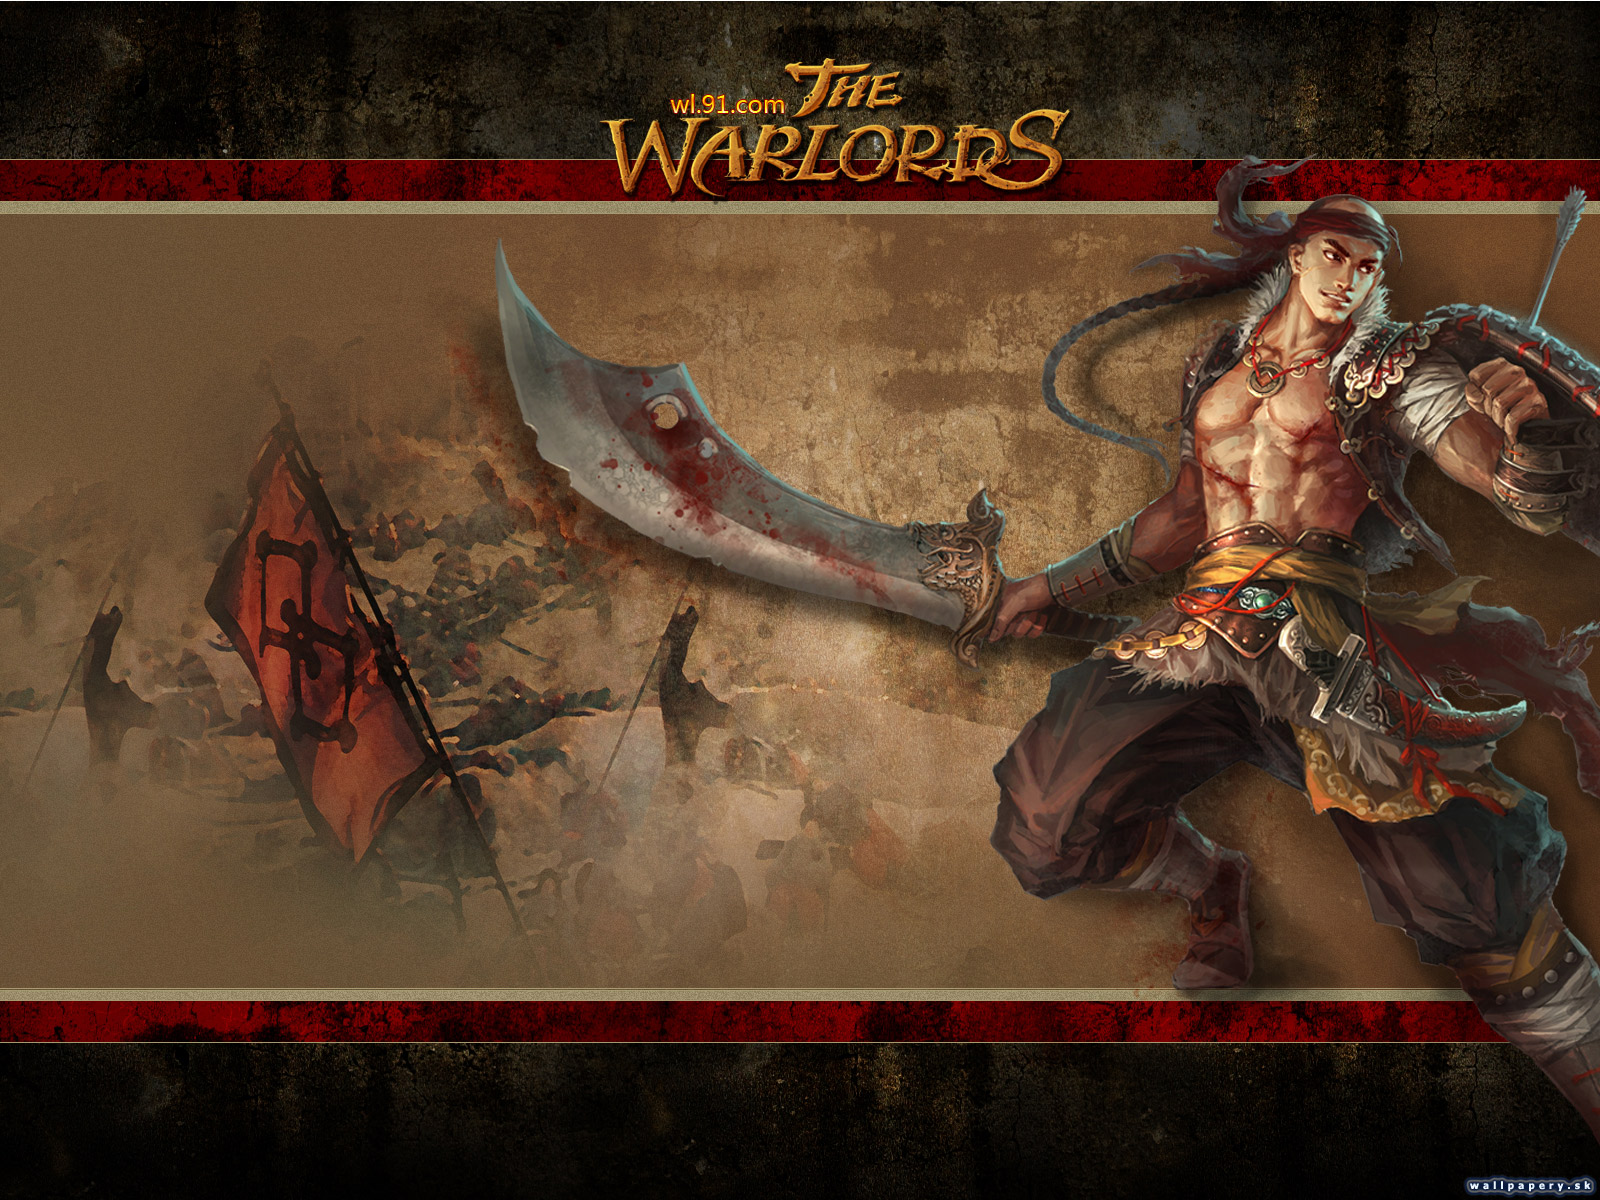 The Warlords - wallpaper 9